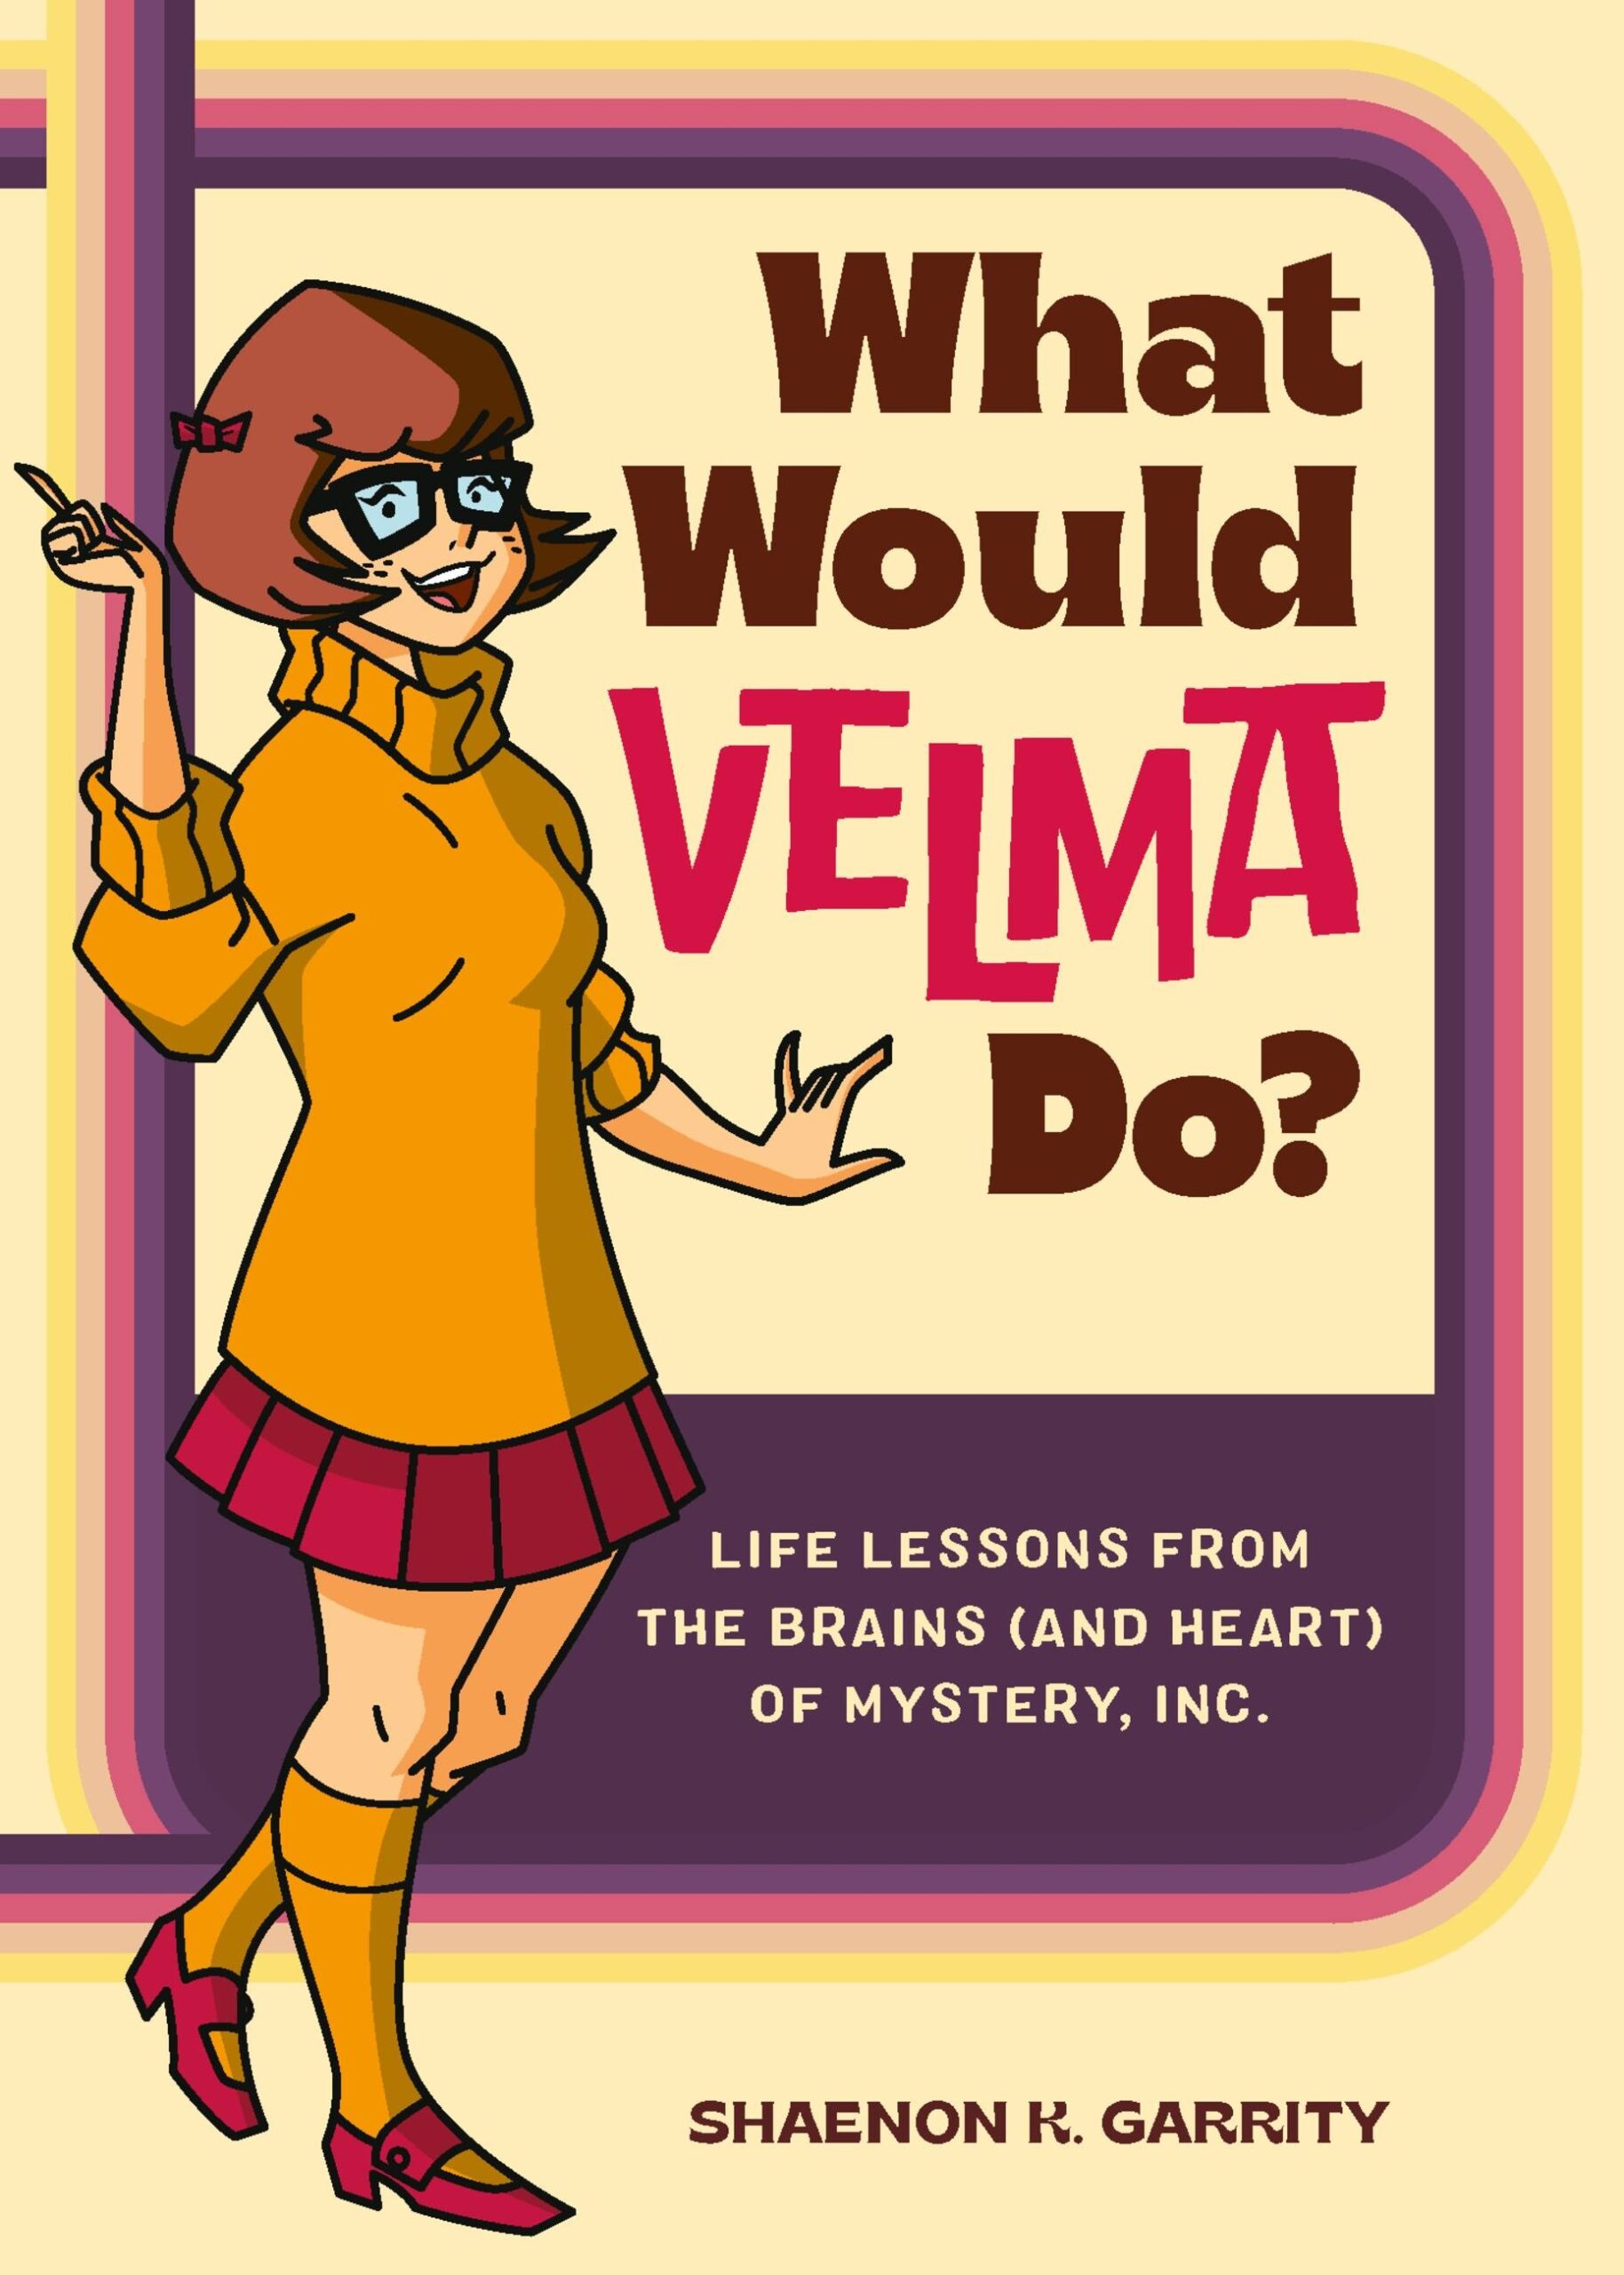 The book, What Would Velma Do?